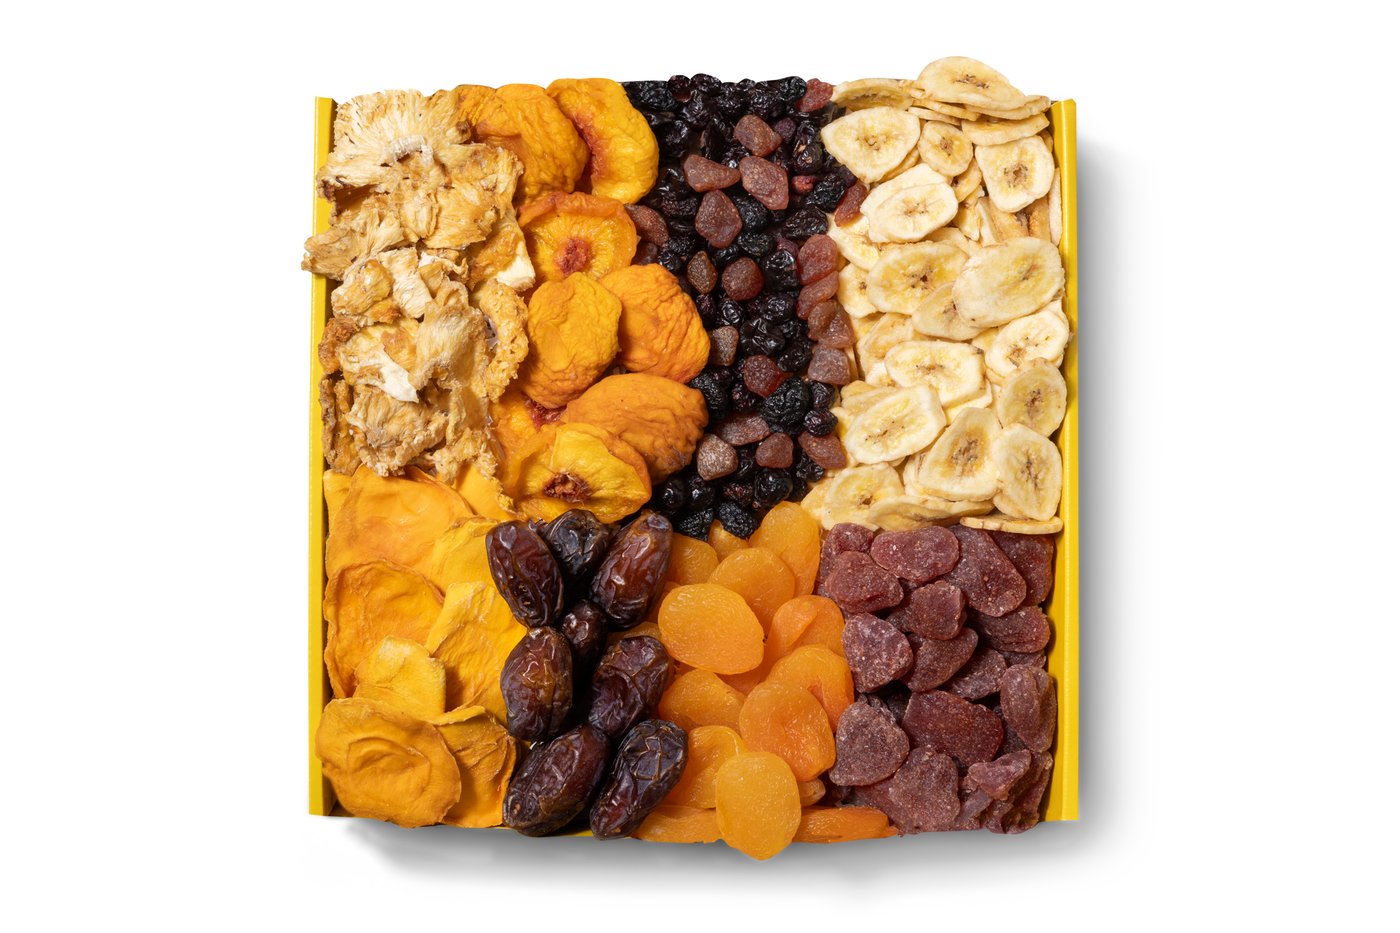 Buy our thank you hearty dried fruit & nut tray at broadwaybasketeers.com